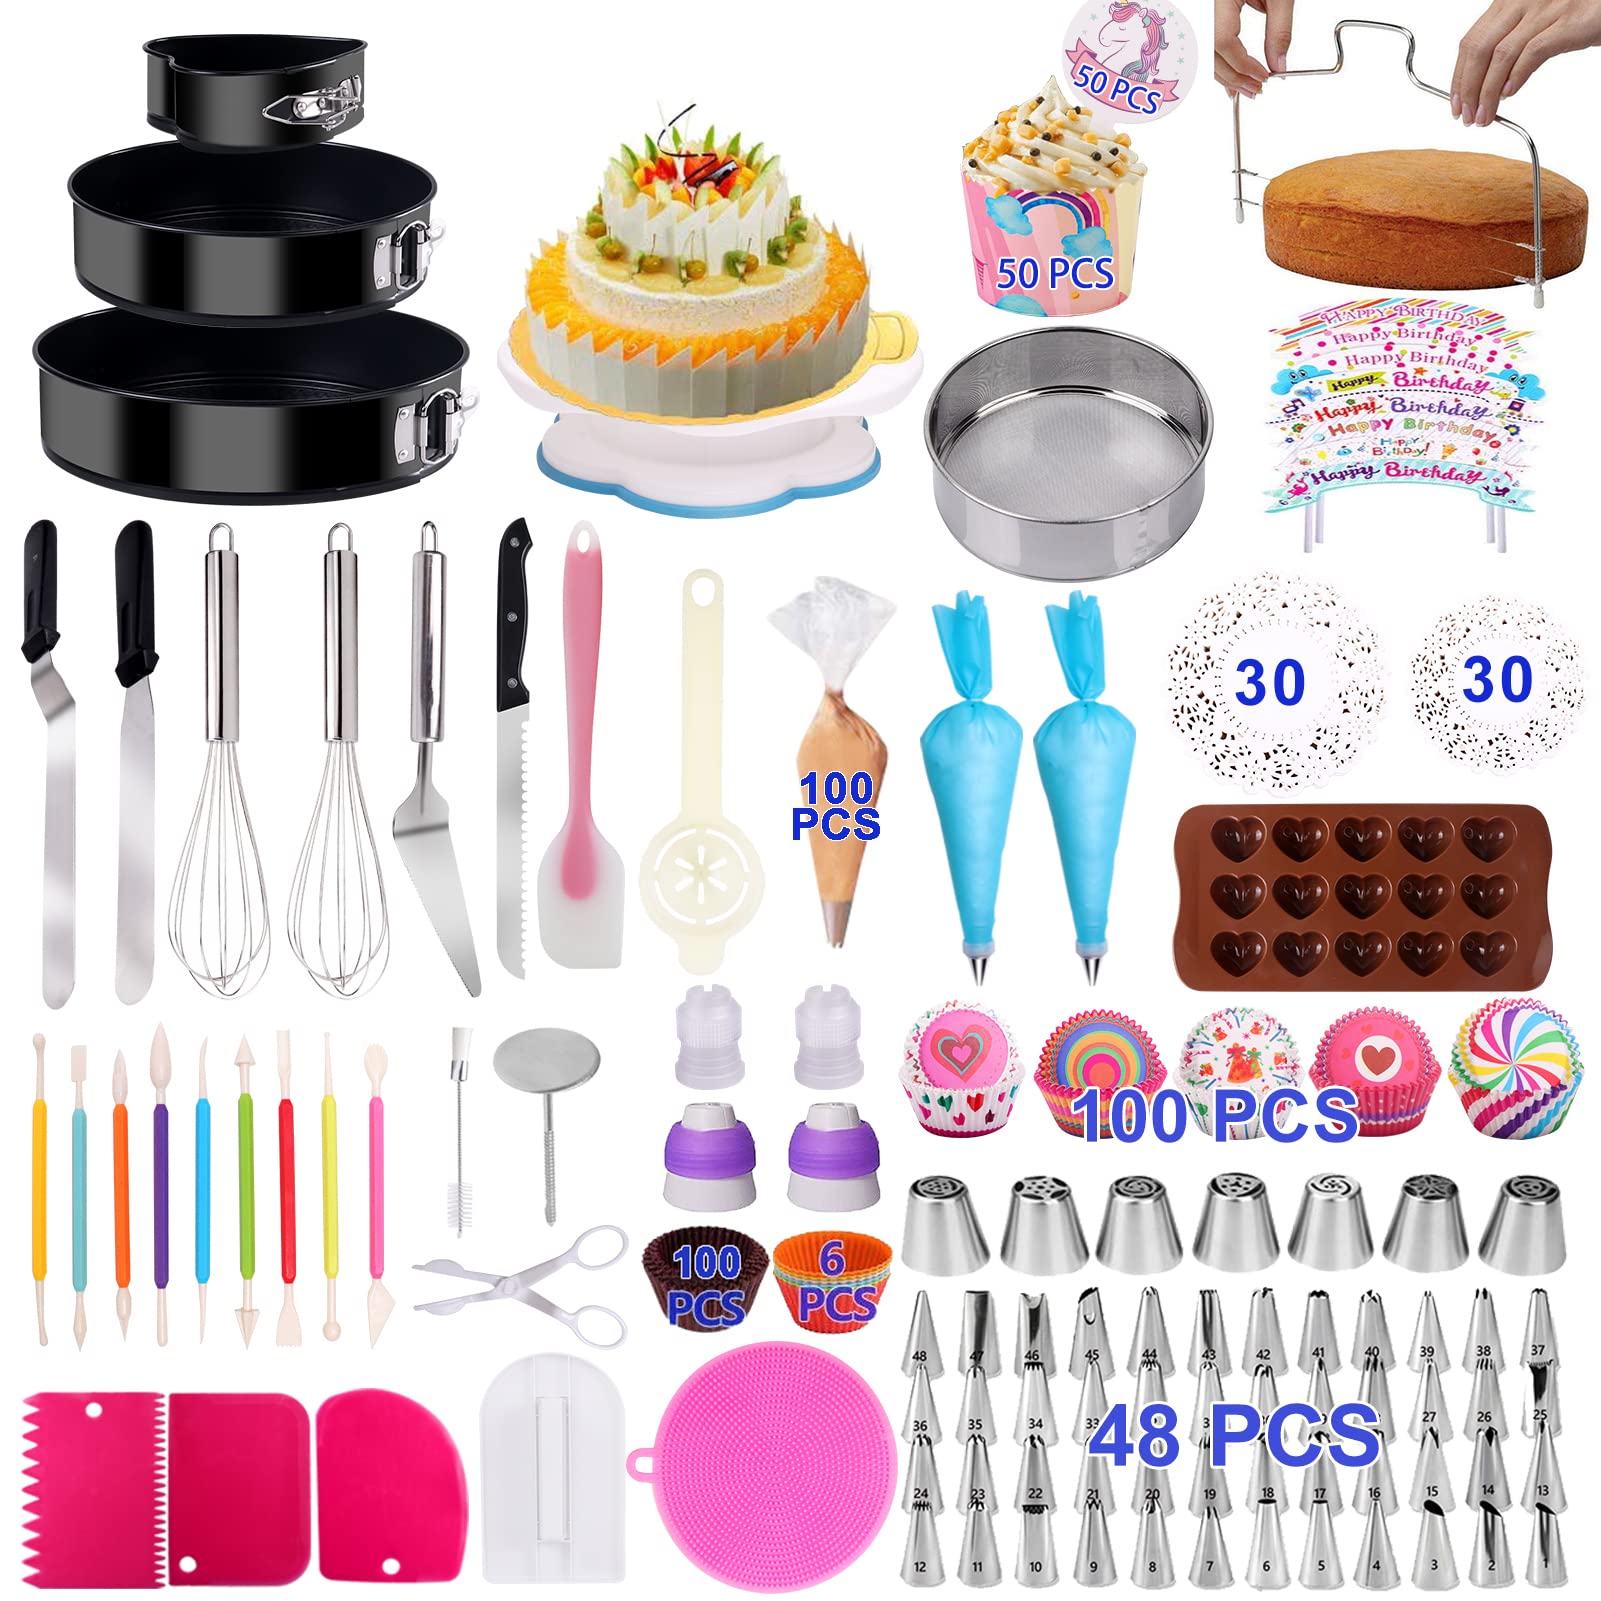 Top 10 cake decorating kit for all levels of expertise